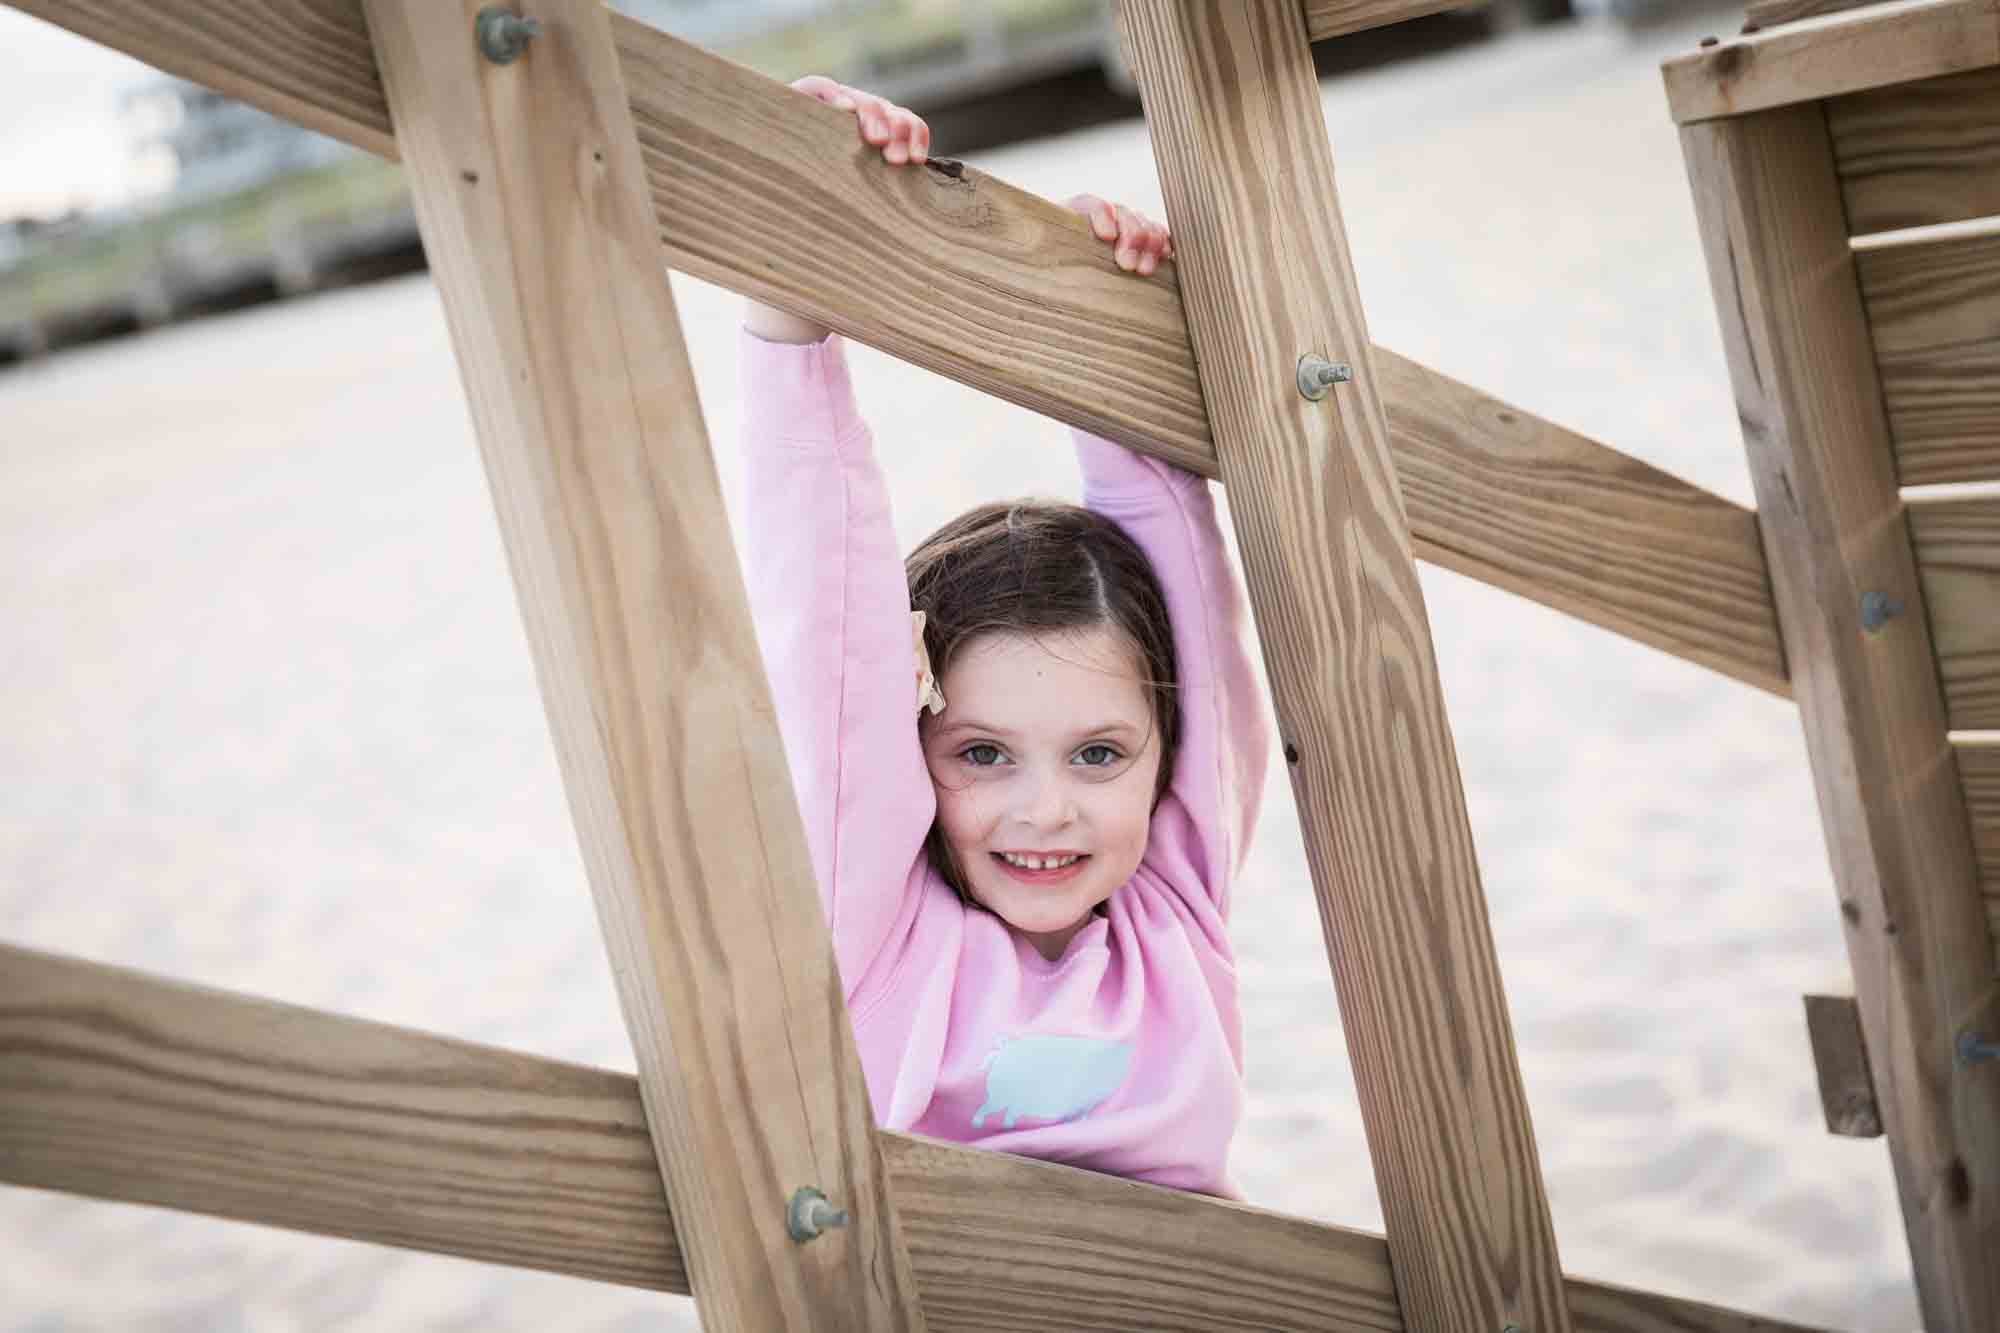 Little girl in pink shirt hanging from wooden rafter